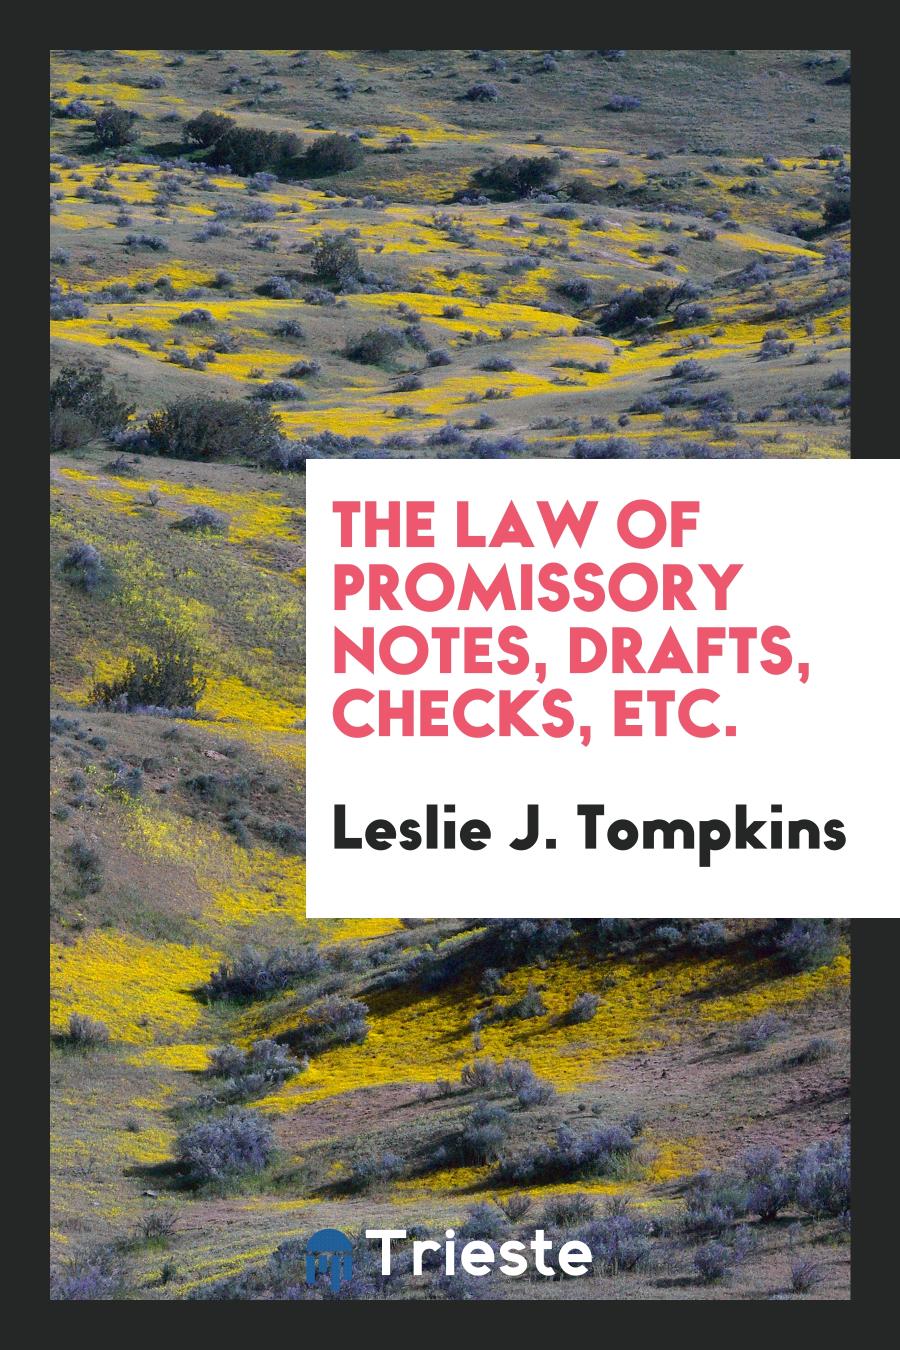 The Law of Promissory Notes, Drafts, Checks, Etc.